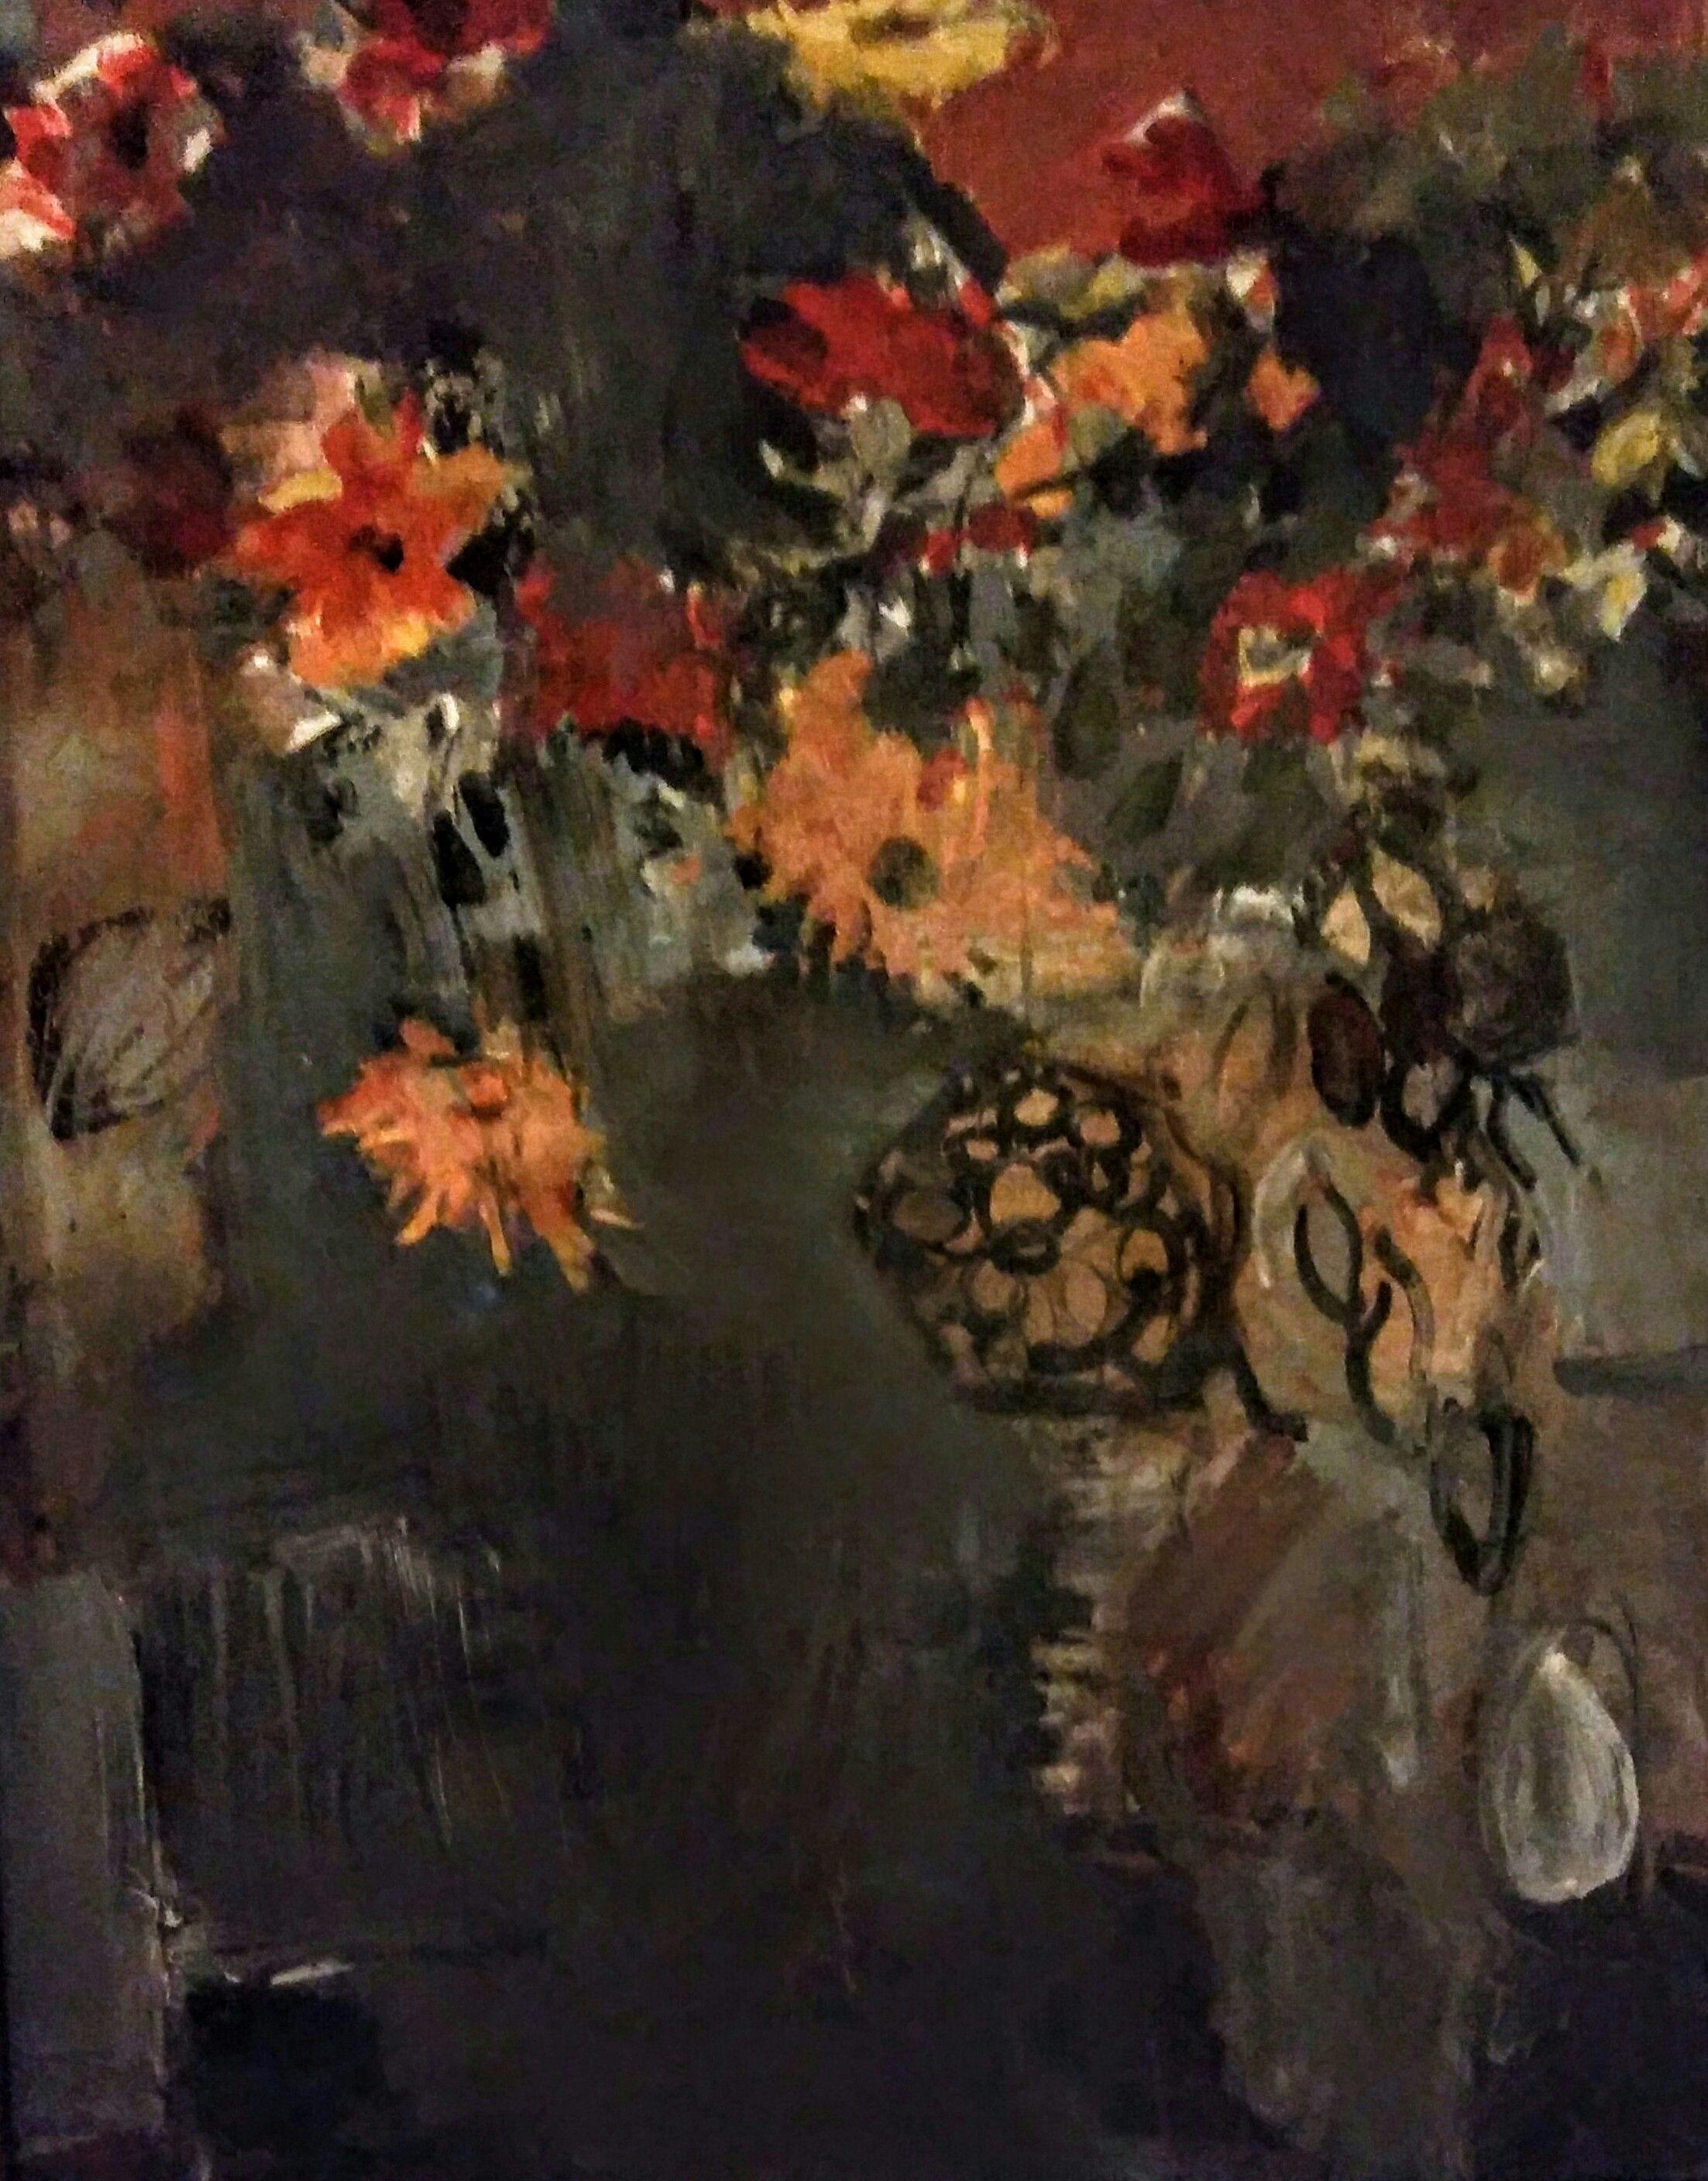 June Johnson Abstract Painting - "Flowers For Brueghel", Painting, Acrylic on Canvas